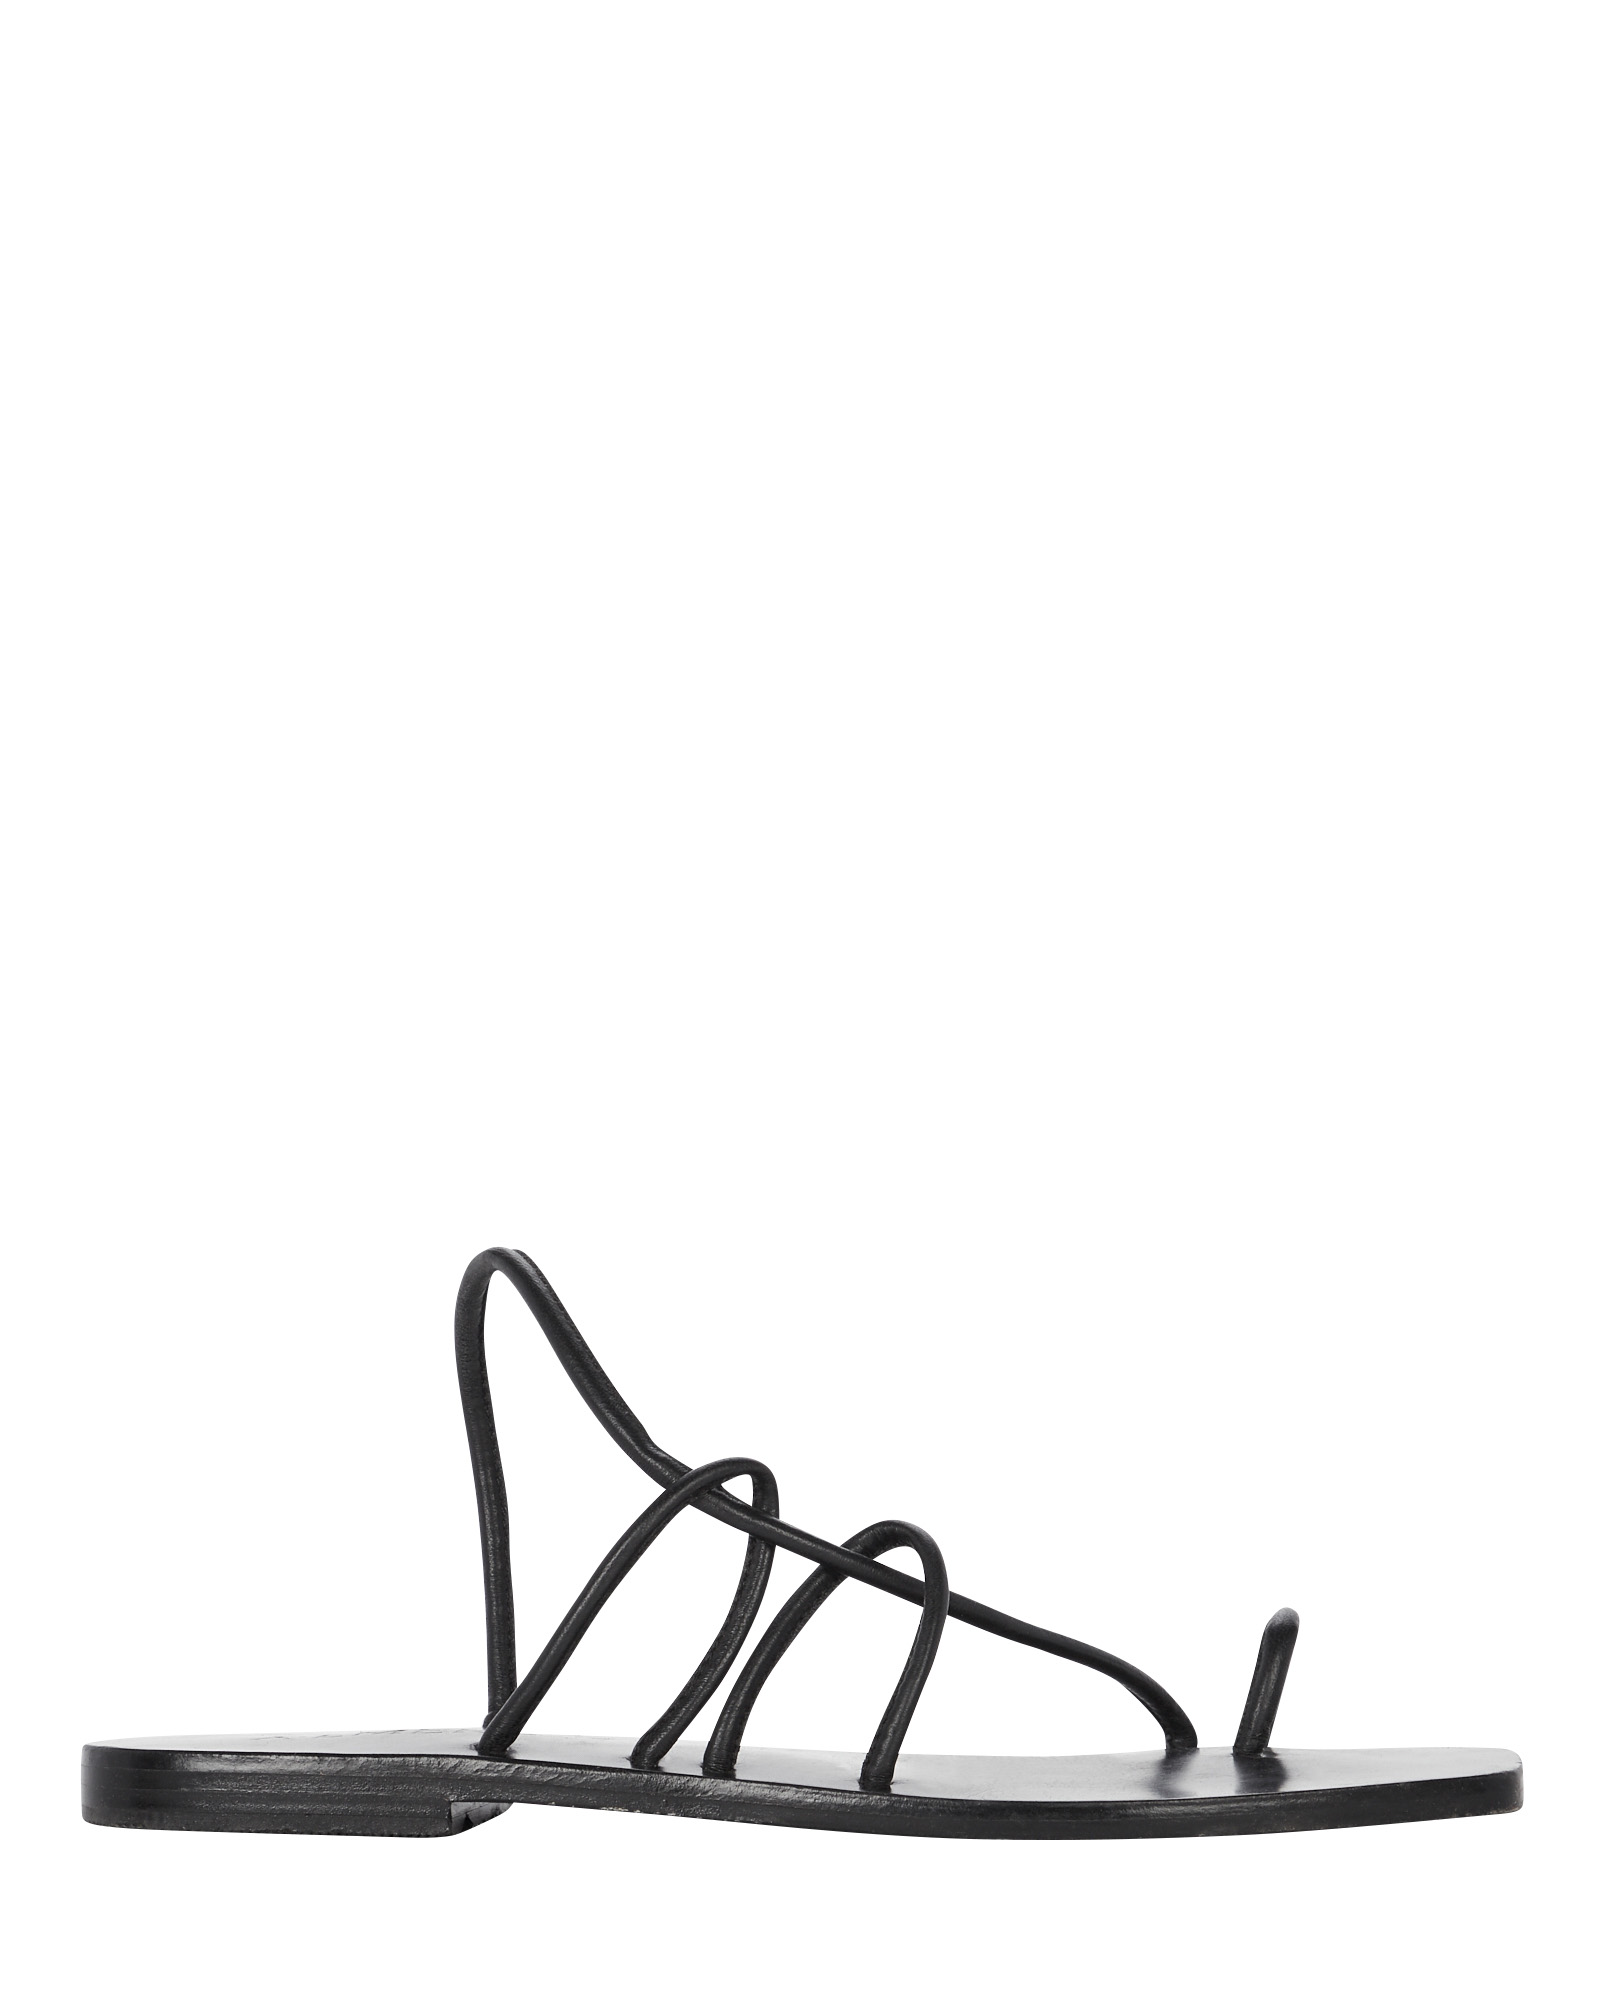 A.EMERY Willow Strappy Slide Leather Sandals | INTERMIX®